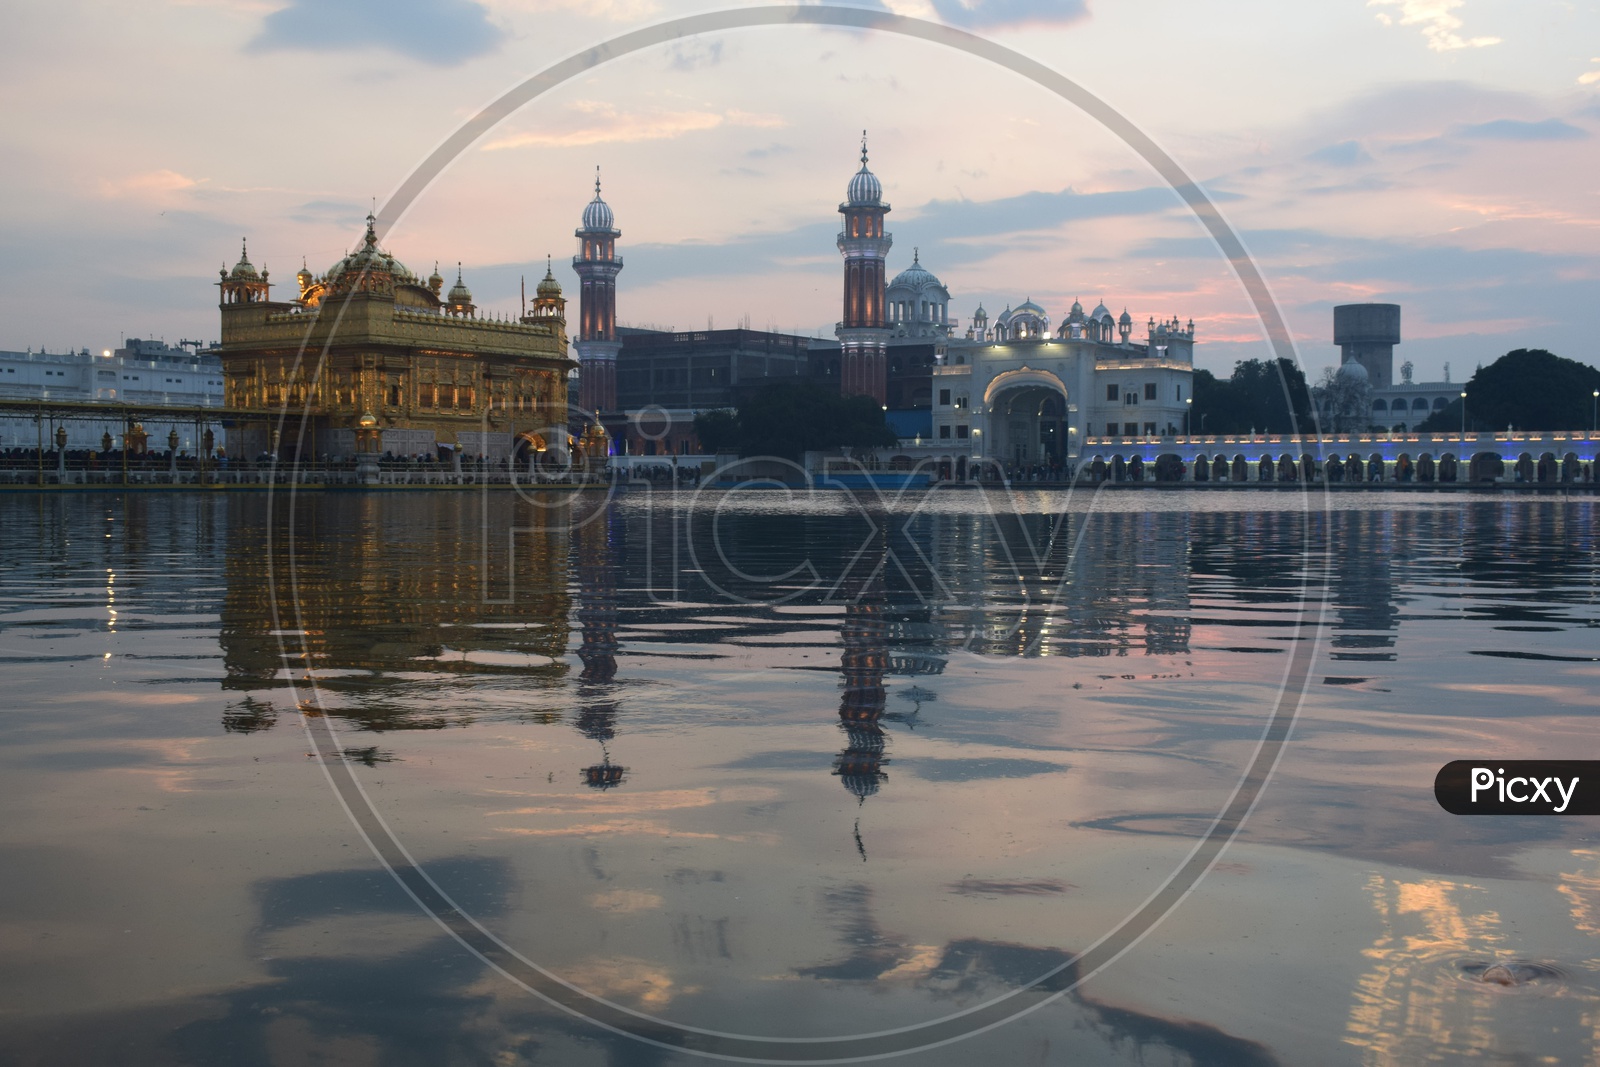 Sunrise at the Golden temple in Amritsar